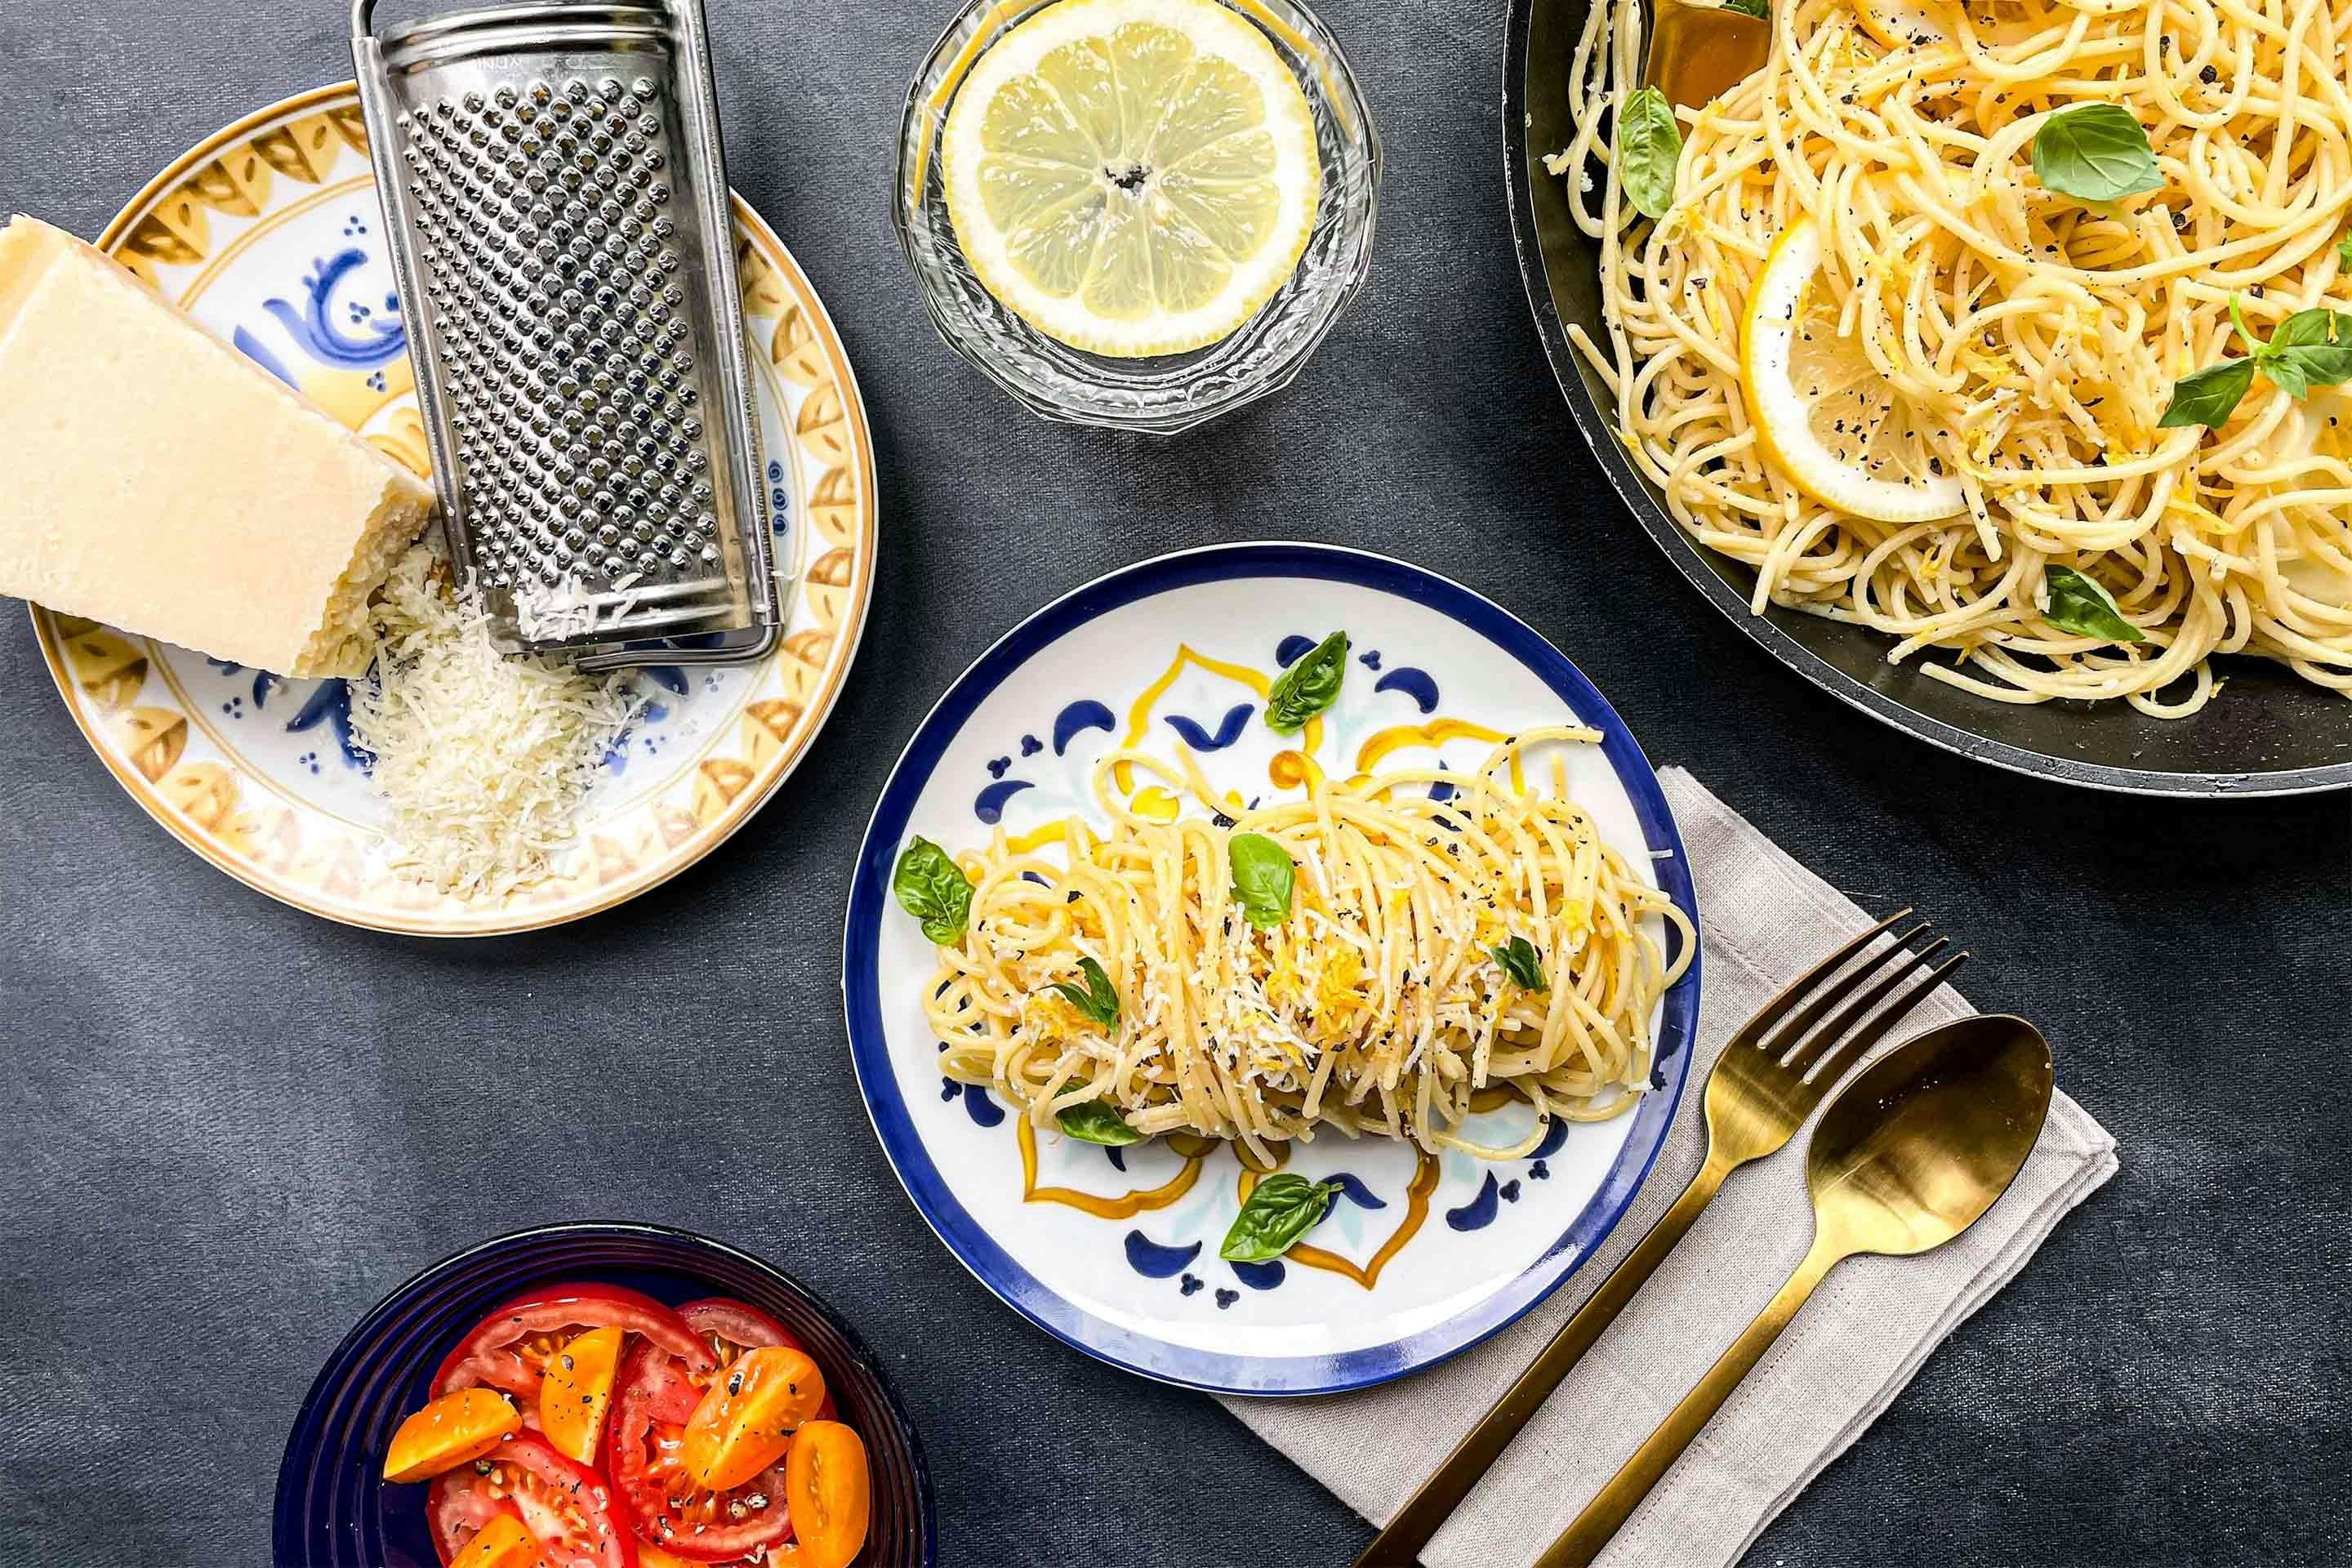 Take a culinary trip to Italy with Italian lemon pasta.